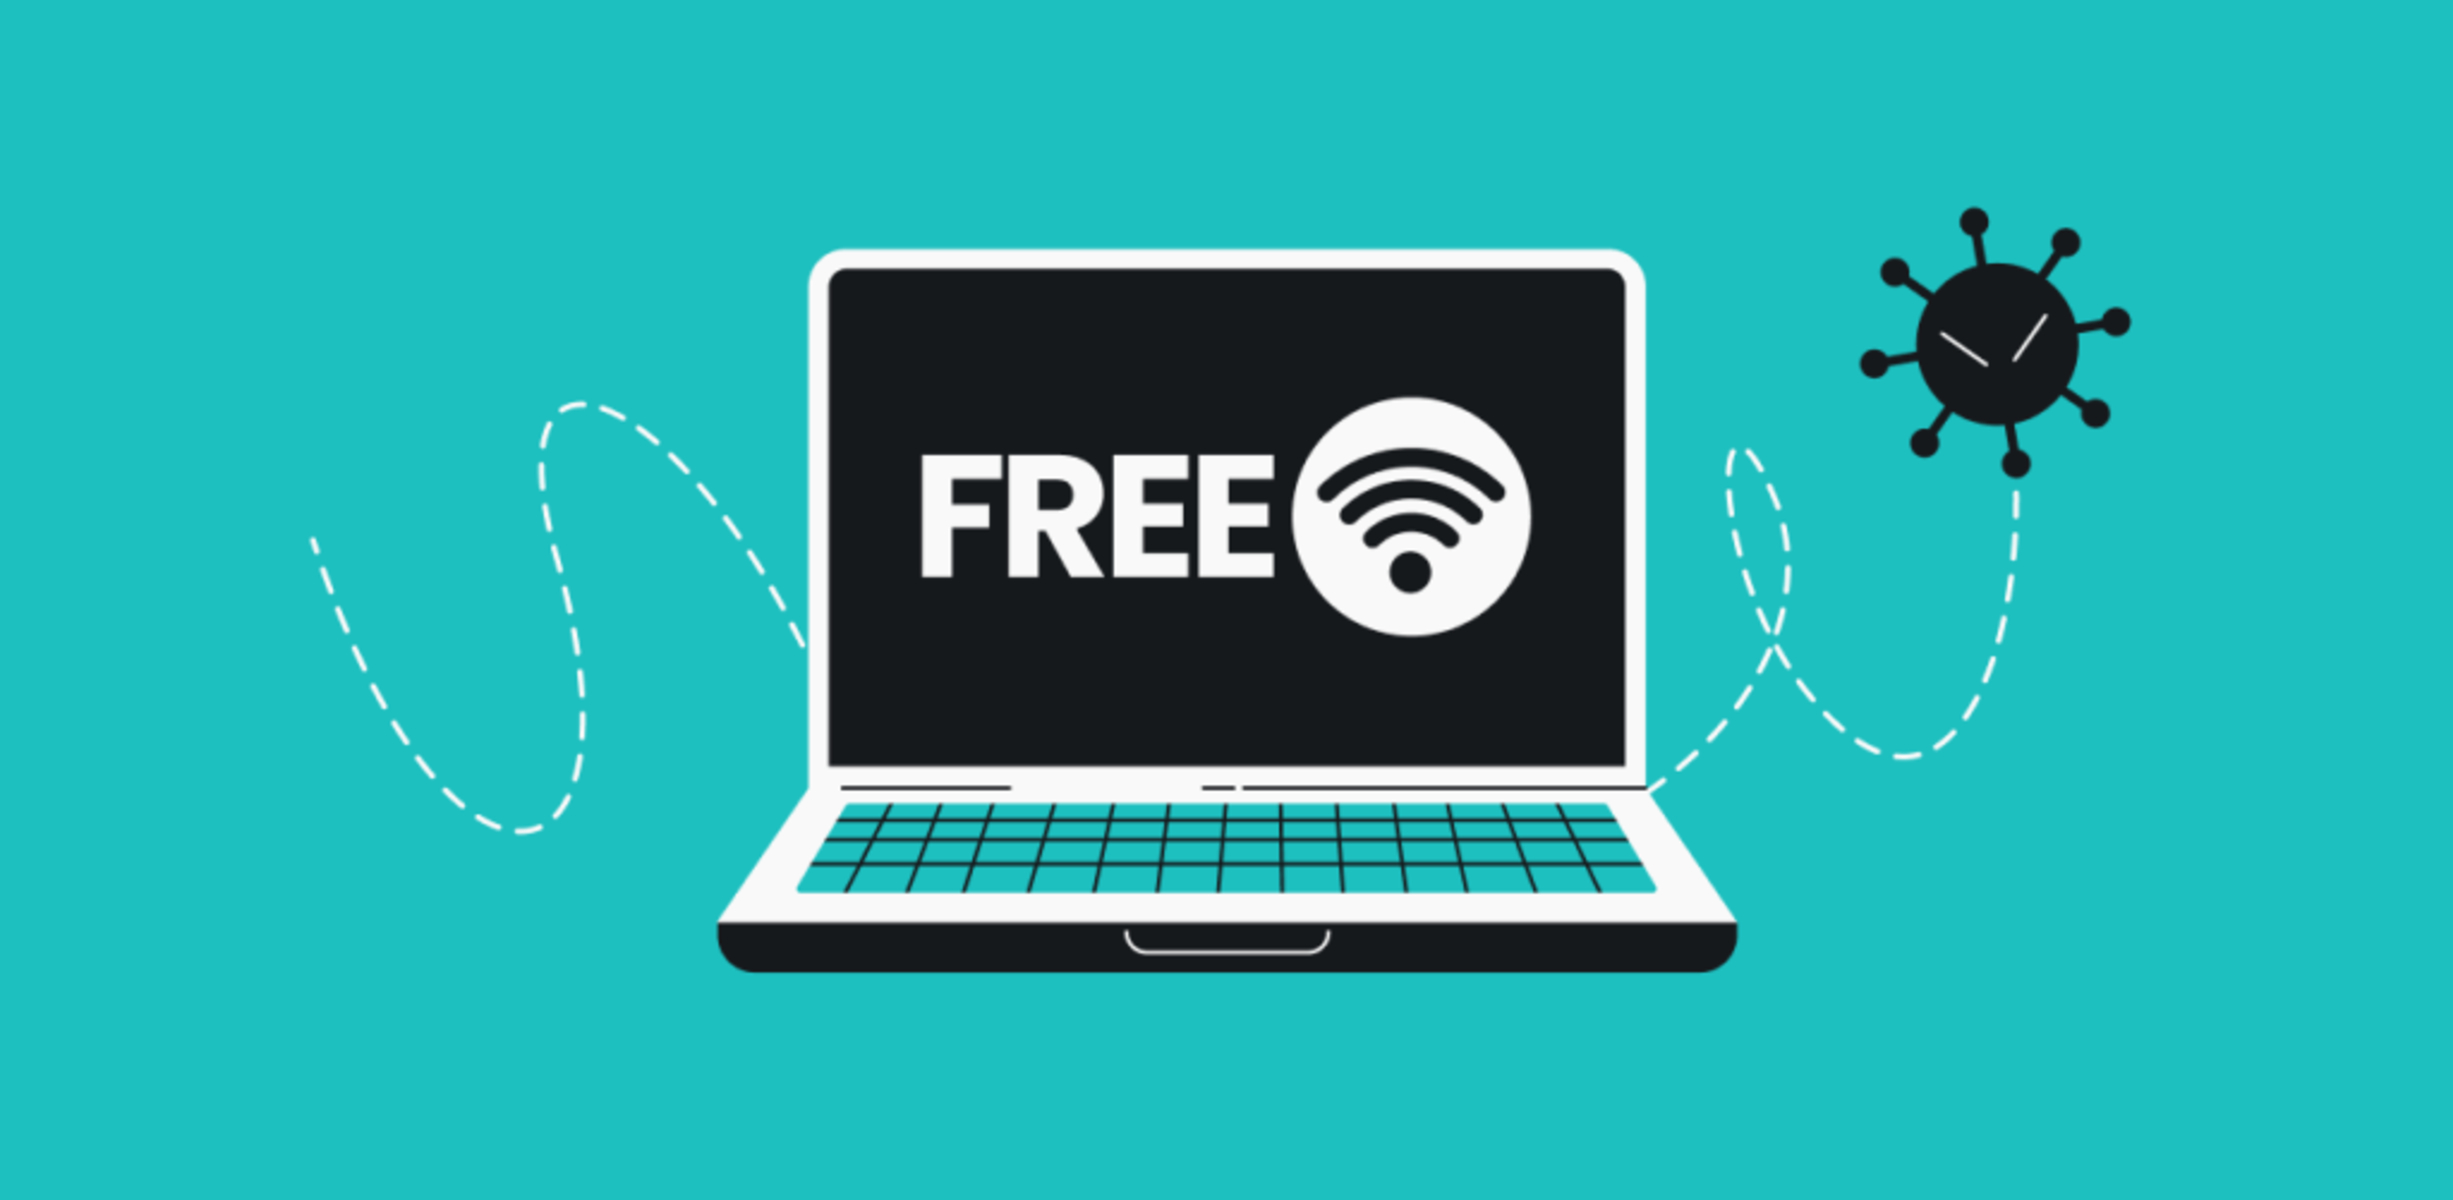 creating-a-free-wi-fi-hotspot-easy-and-secure-methods